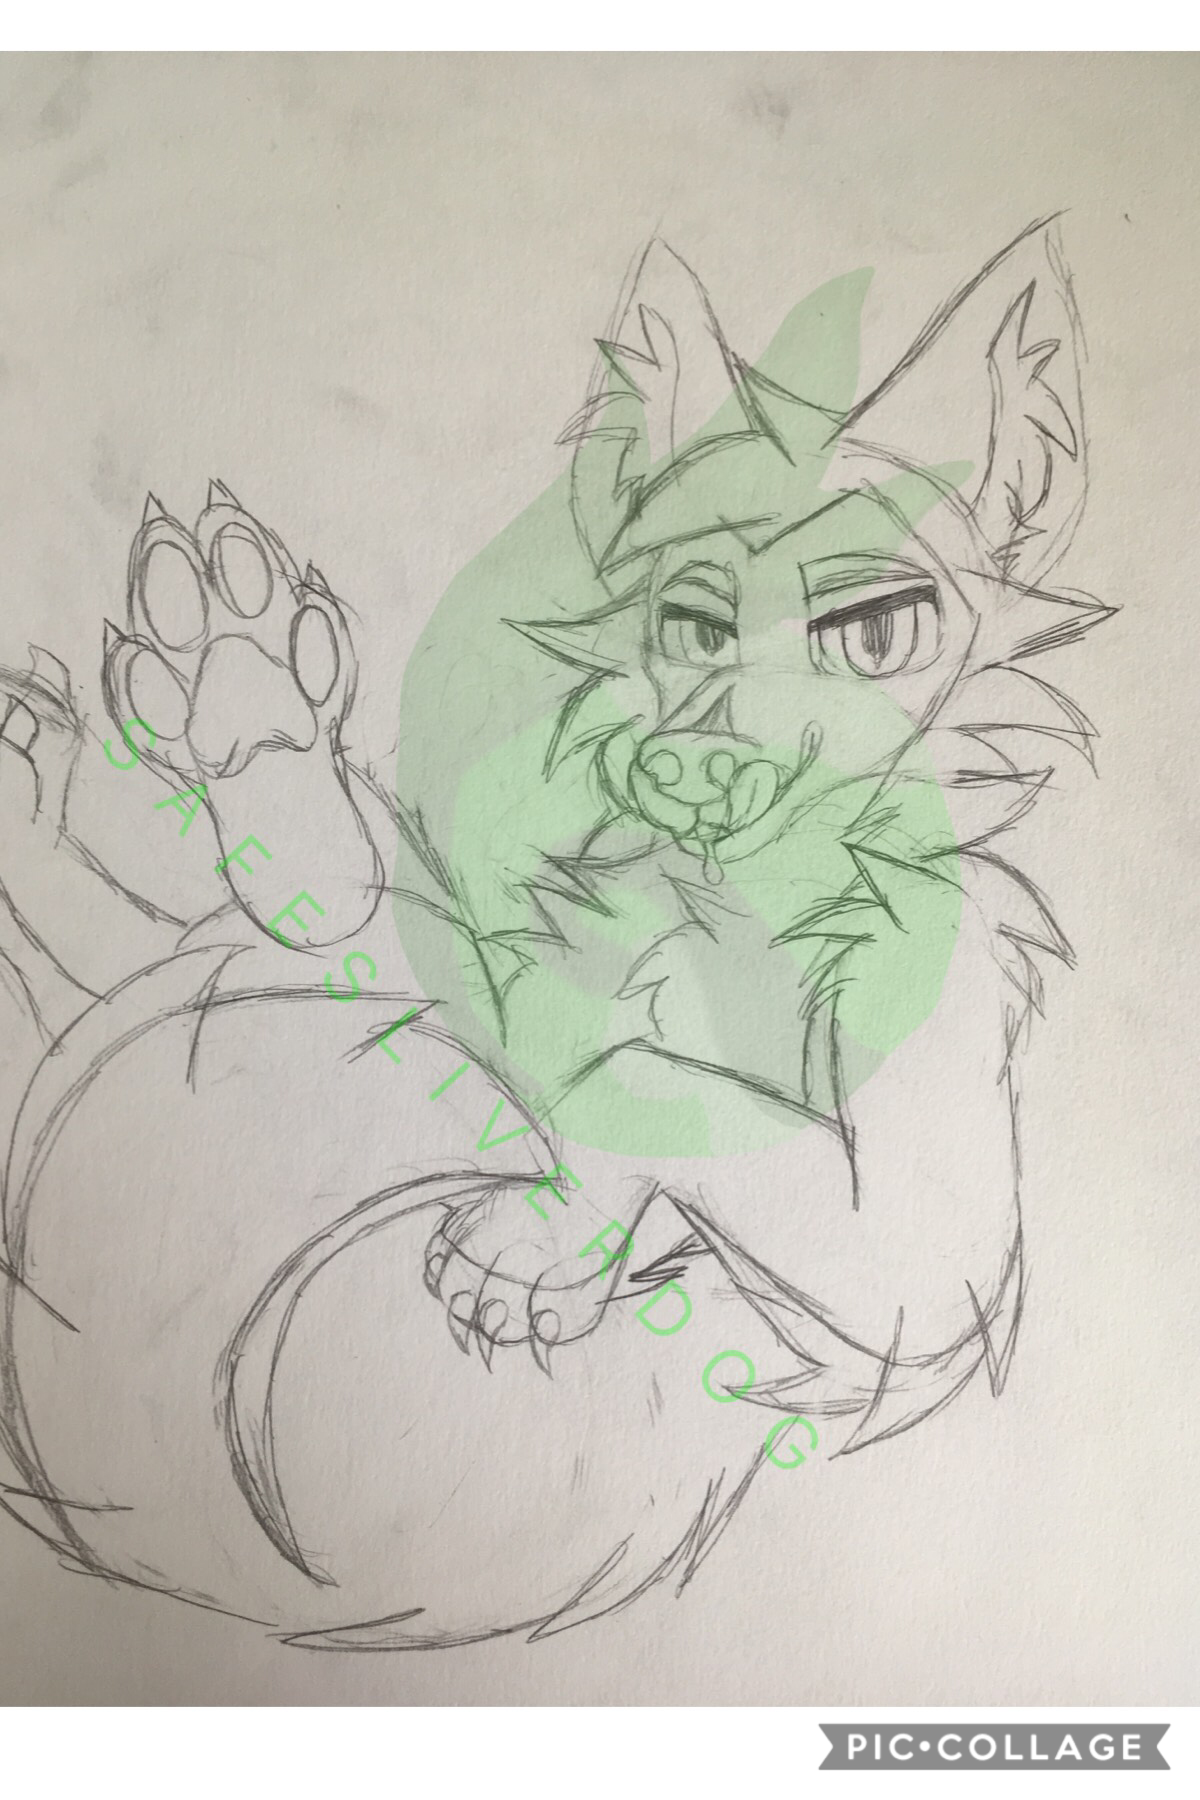 TAP!
What does this remind you of? Also, this is Olive Husky again QwQ I need to sell him or do a DTA with him or something I don’t like him but there’s a whole backstory behind that. I’ll tell ya if you ask UwU 
TILLY WILLY HAS A LITTLE DILLY 